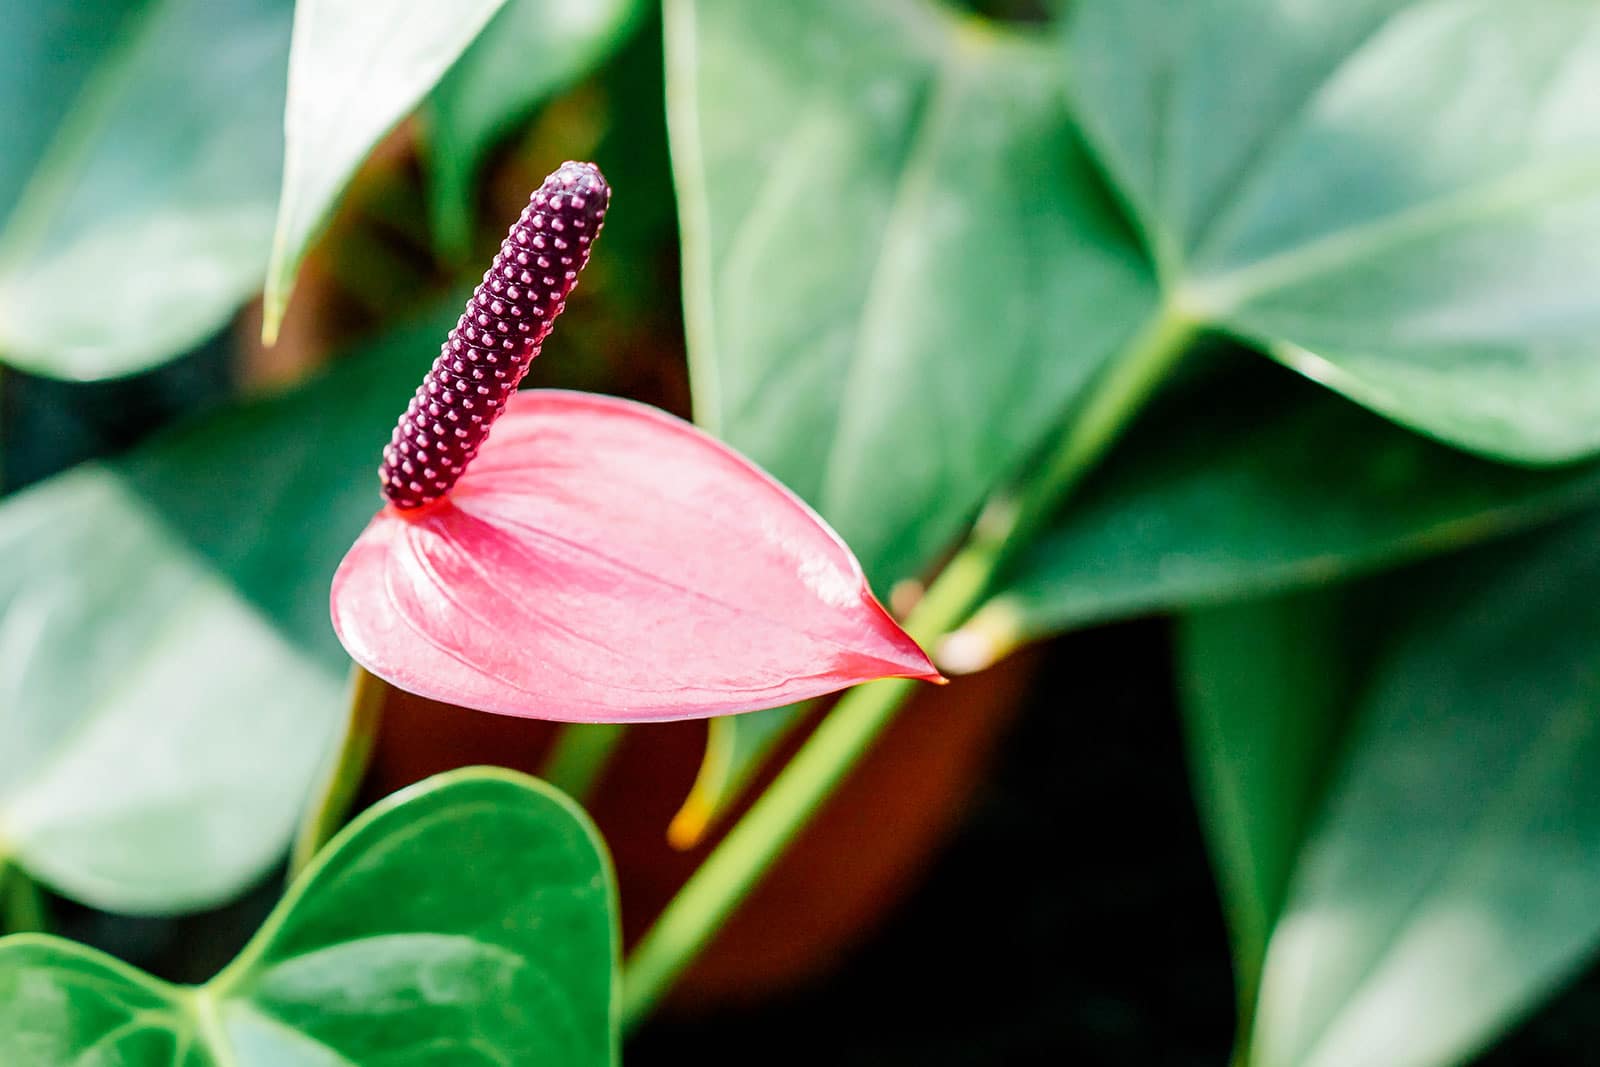 Anthurium plant (flamingo lily) with waxy pink flower